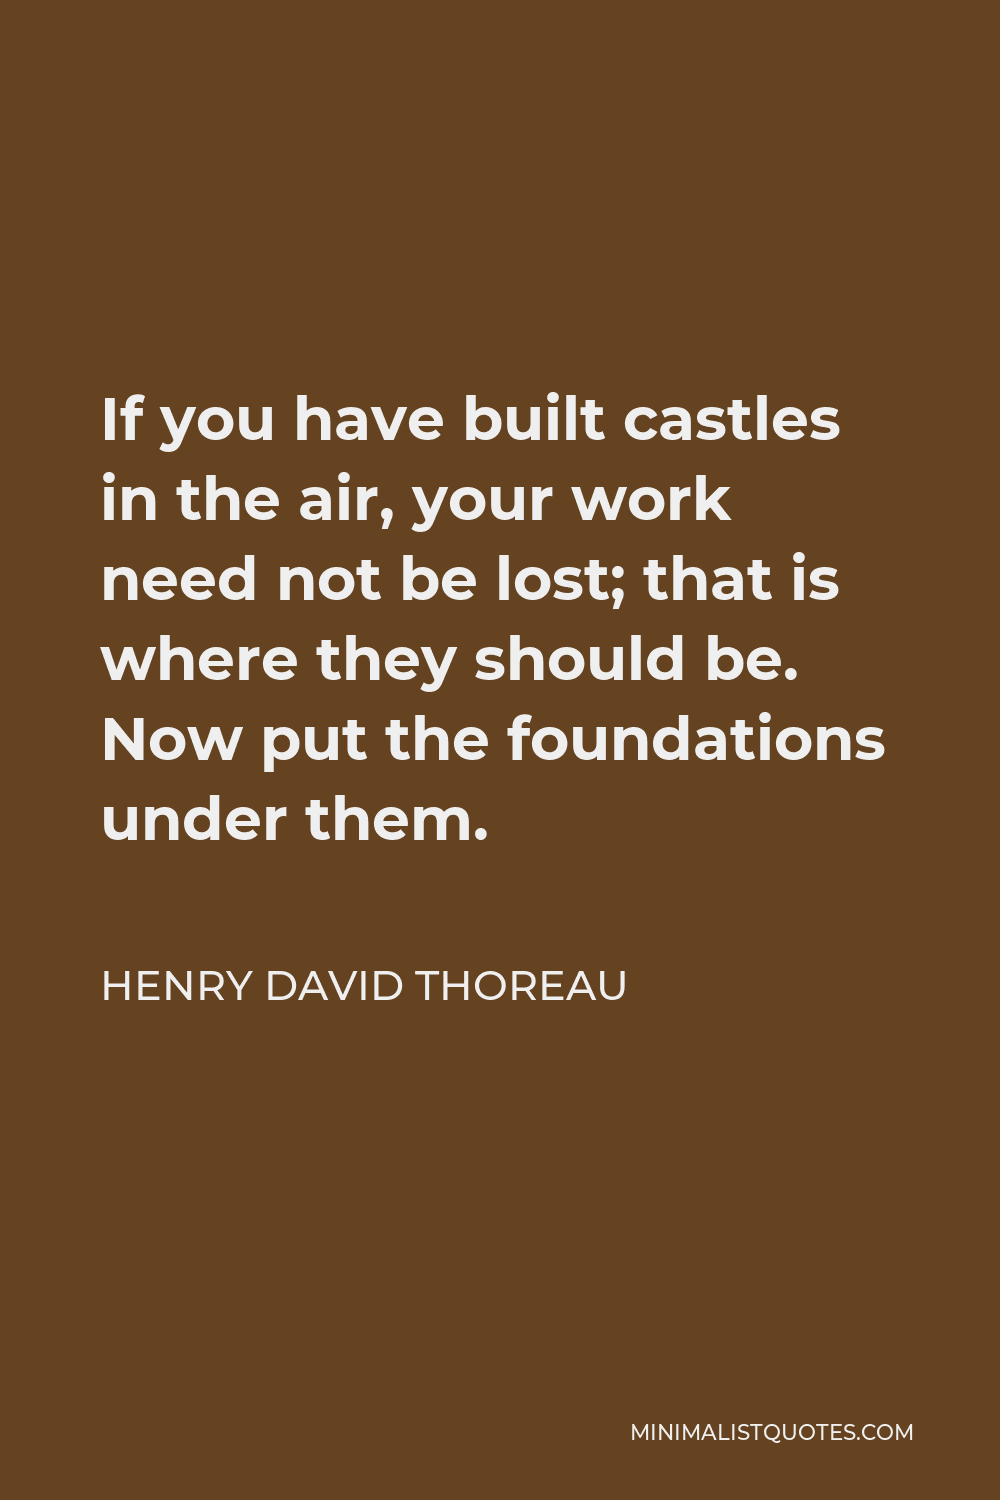 Henry David Thoreau Quote - If you have built castles in the air, your work need not be lost; that is where they should be. Now put the foundations under them.